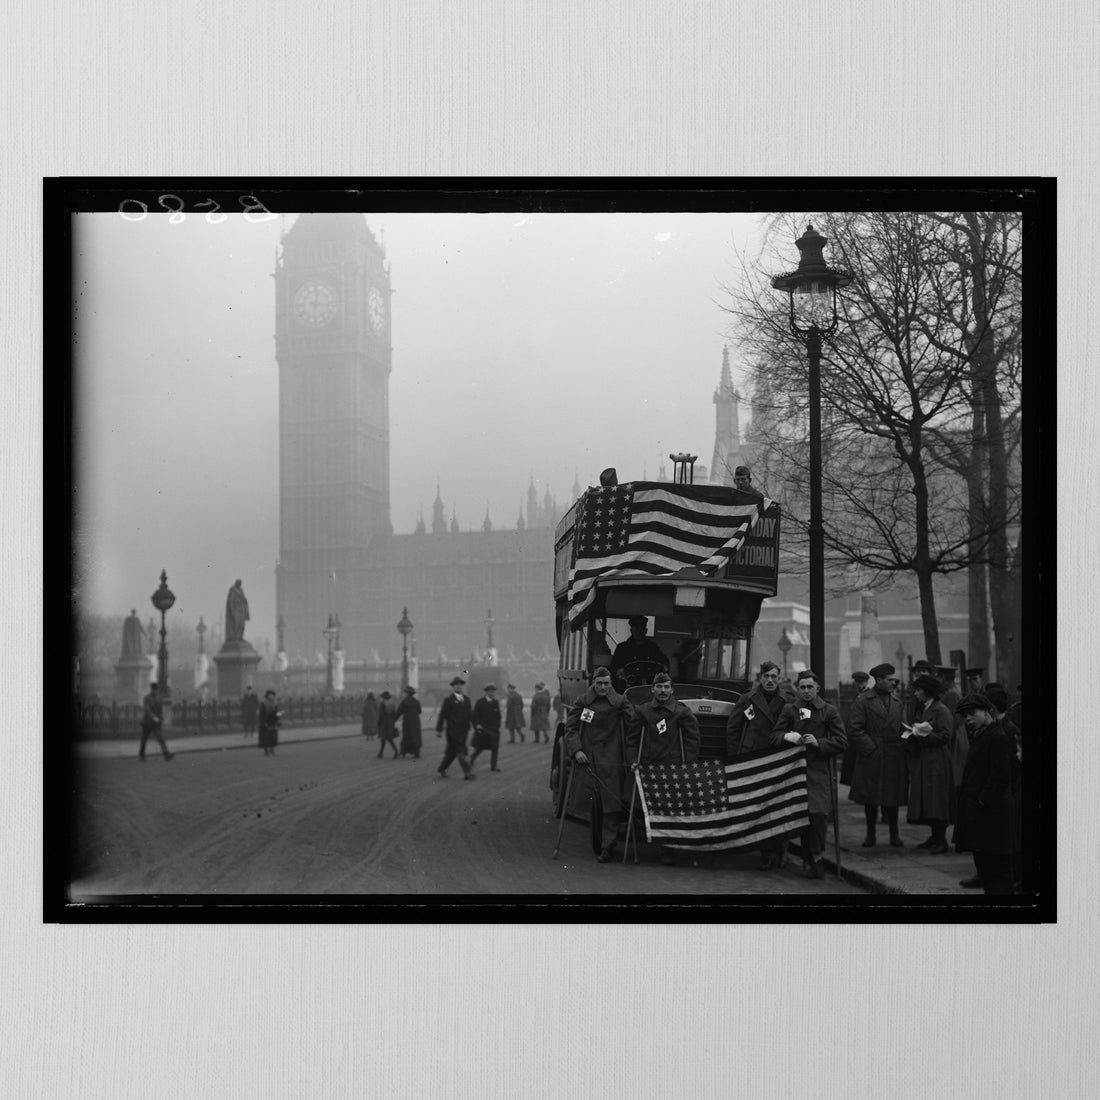 Parliament Square by the American Red Cross, 1918